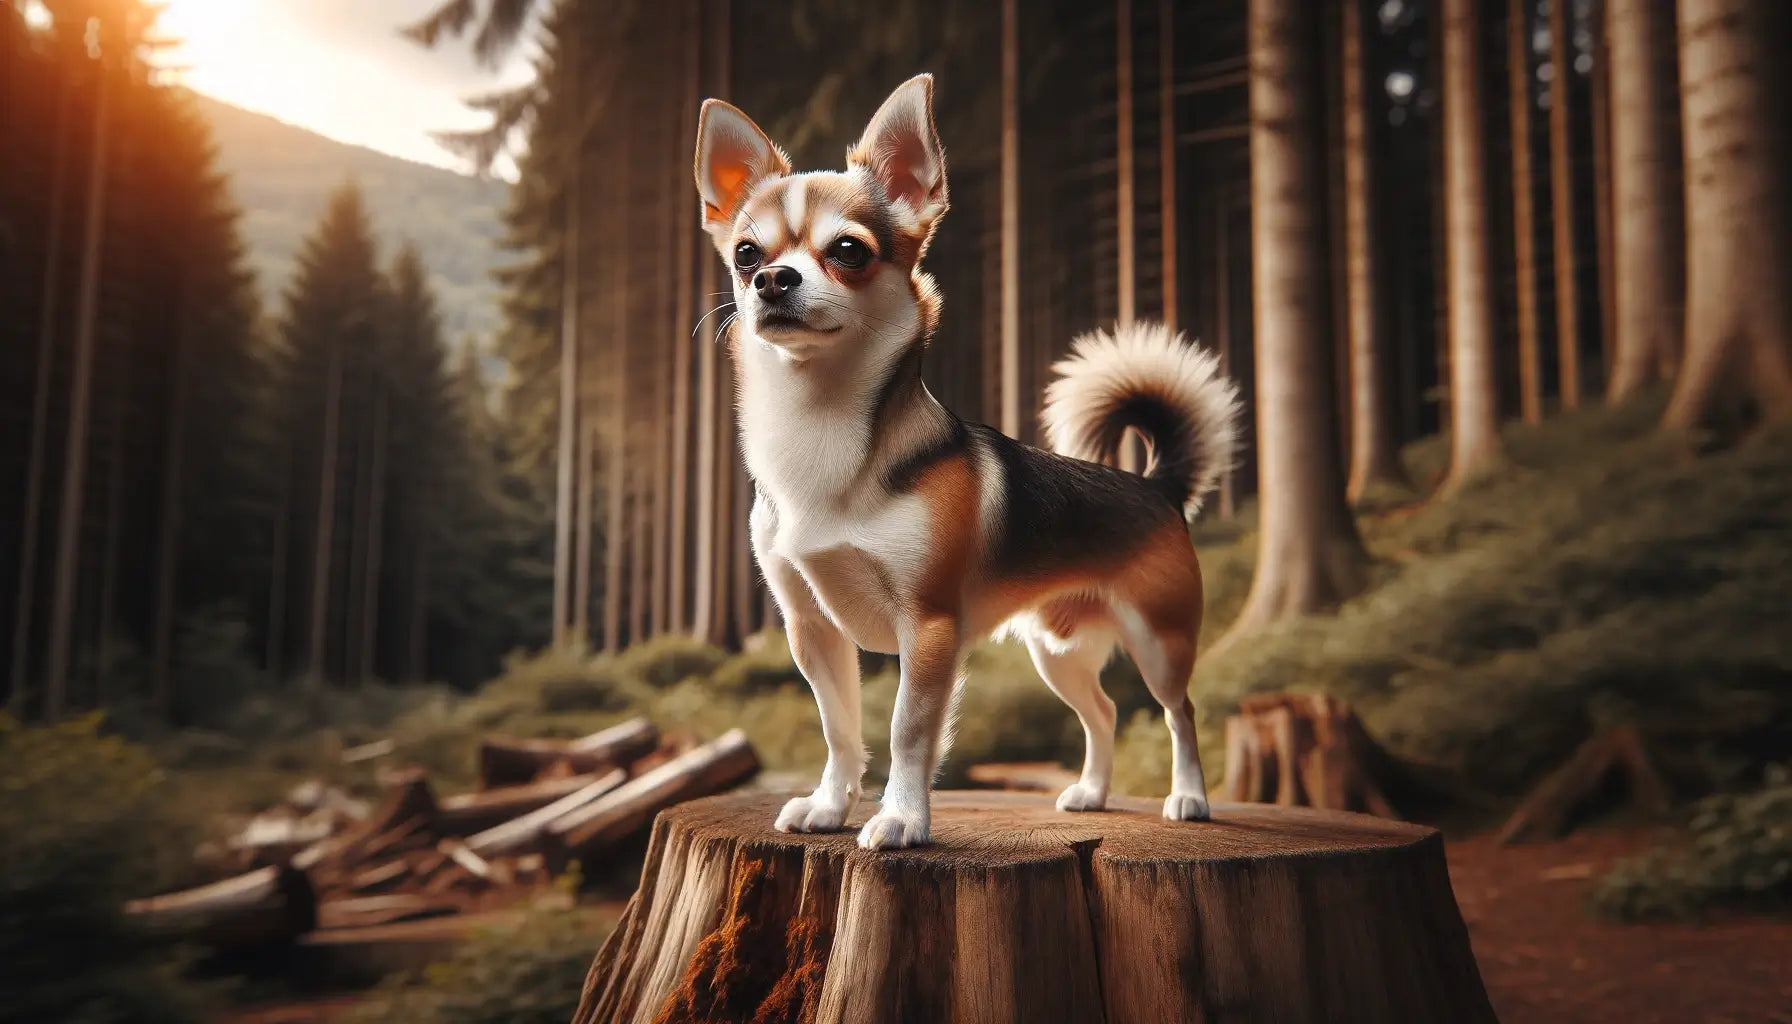 A Chihuahua Husky Mix standing confidently on a tree stump, embodying its compact size and erect ears indicative of its mixed heritage.